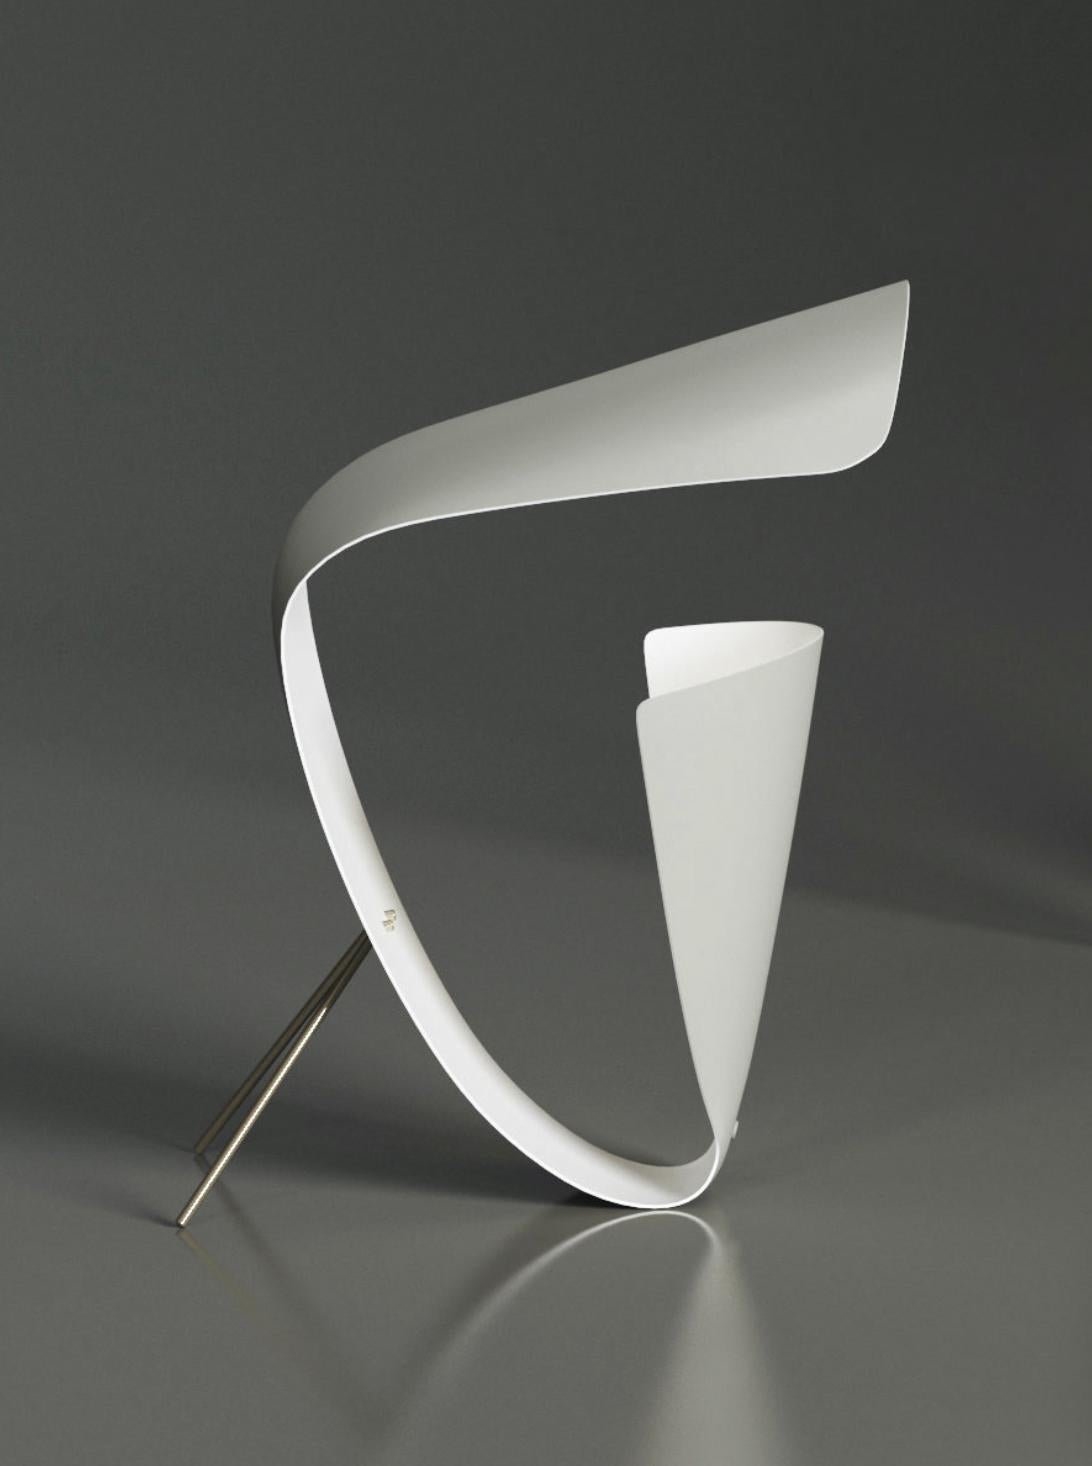 Michel Buffet Mid-Century Modern White B201 desk lamp designed in 1953.

The production of this re-edition lamps, wall lights and floor lamps are manufactured using craftsman’s techniques with the same materials and techniques as the first models.